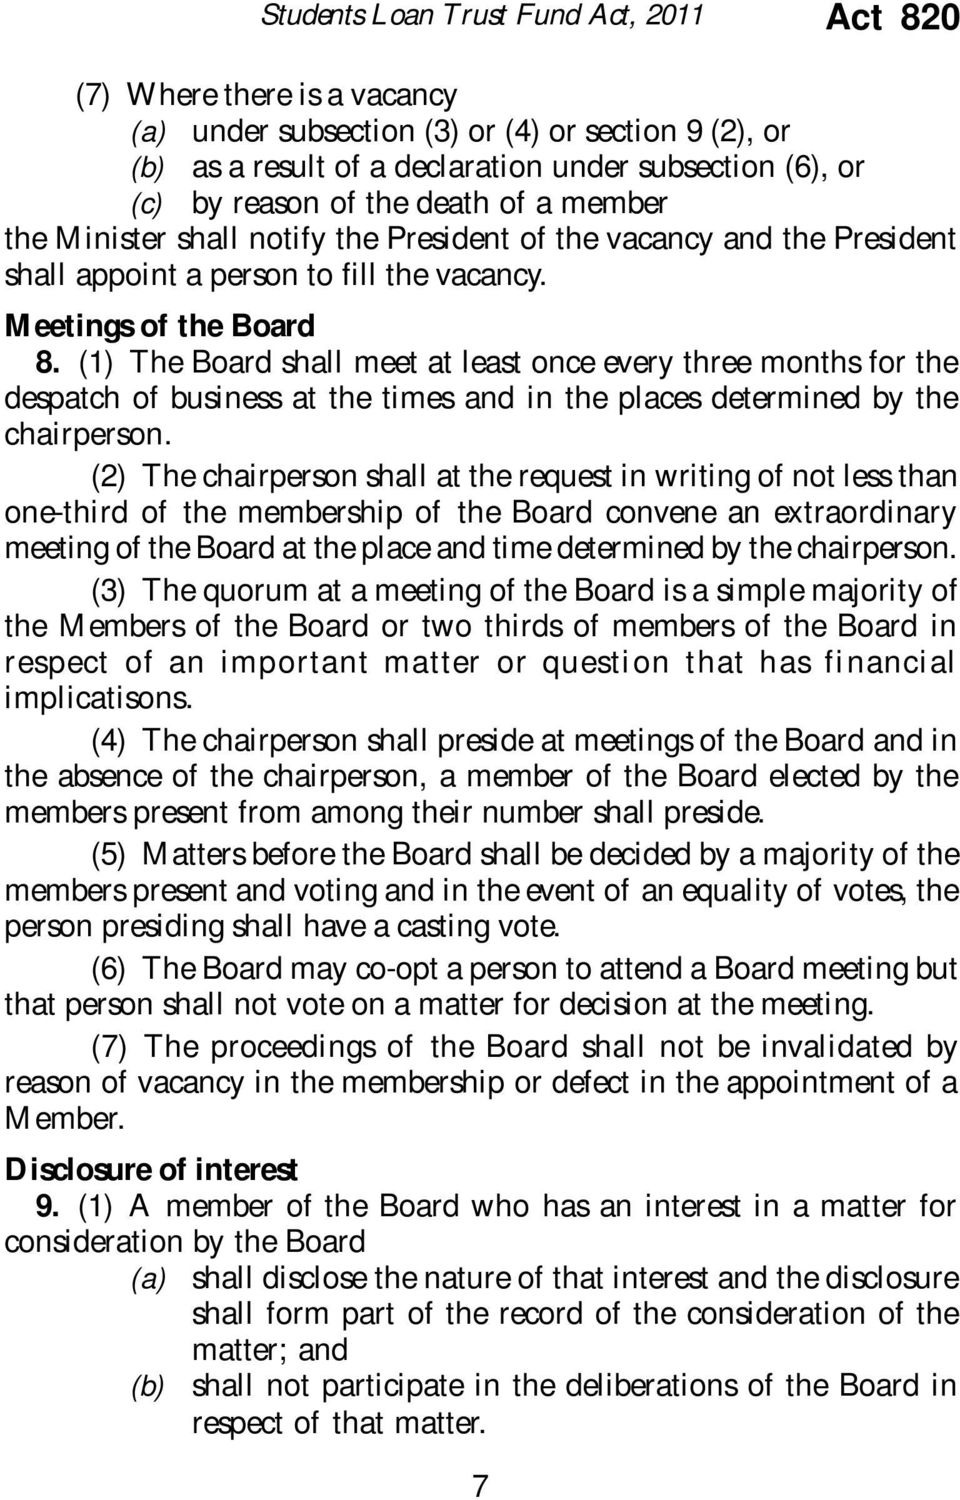 (1) The Board shall meet at least once every three months for the despatch of business at the times and in the places determined by the chairperson.